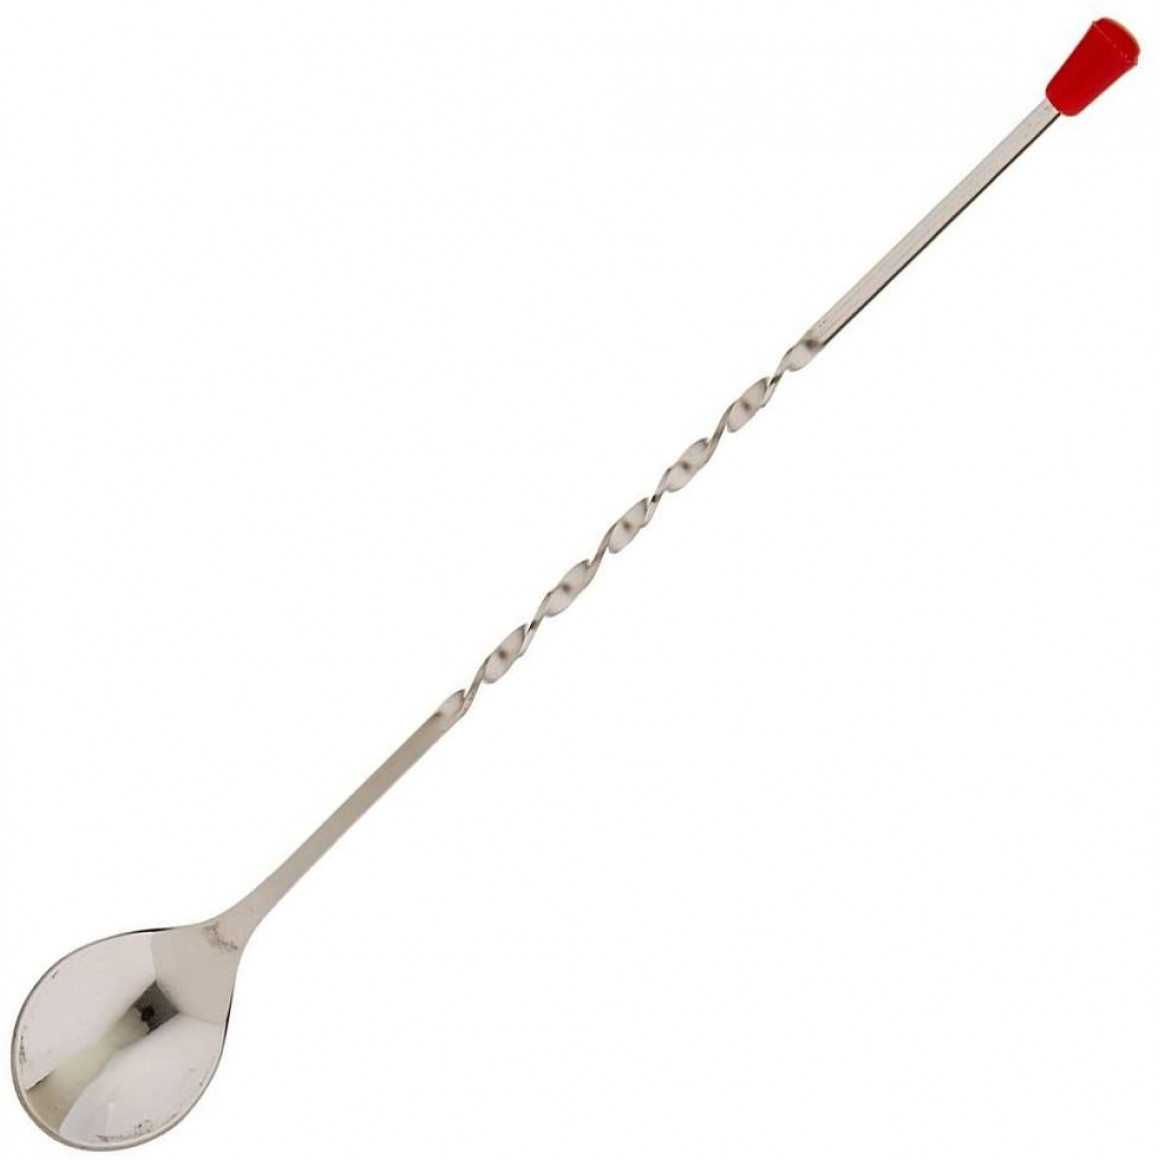 BAR SPOON, STAINLESS STEEL, TWISTED, NO KNOB, 10